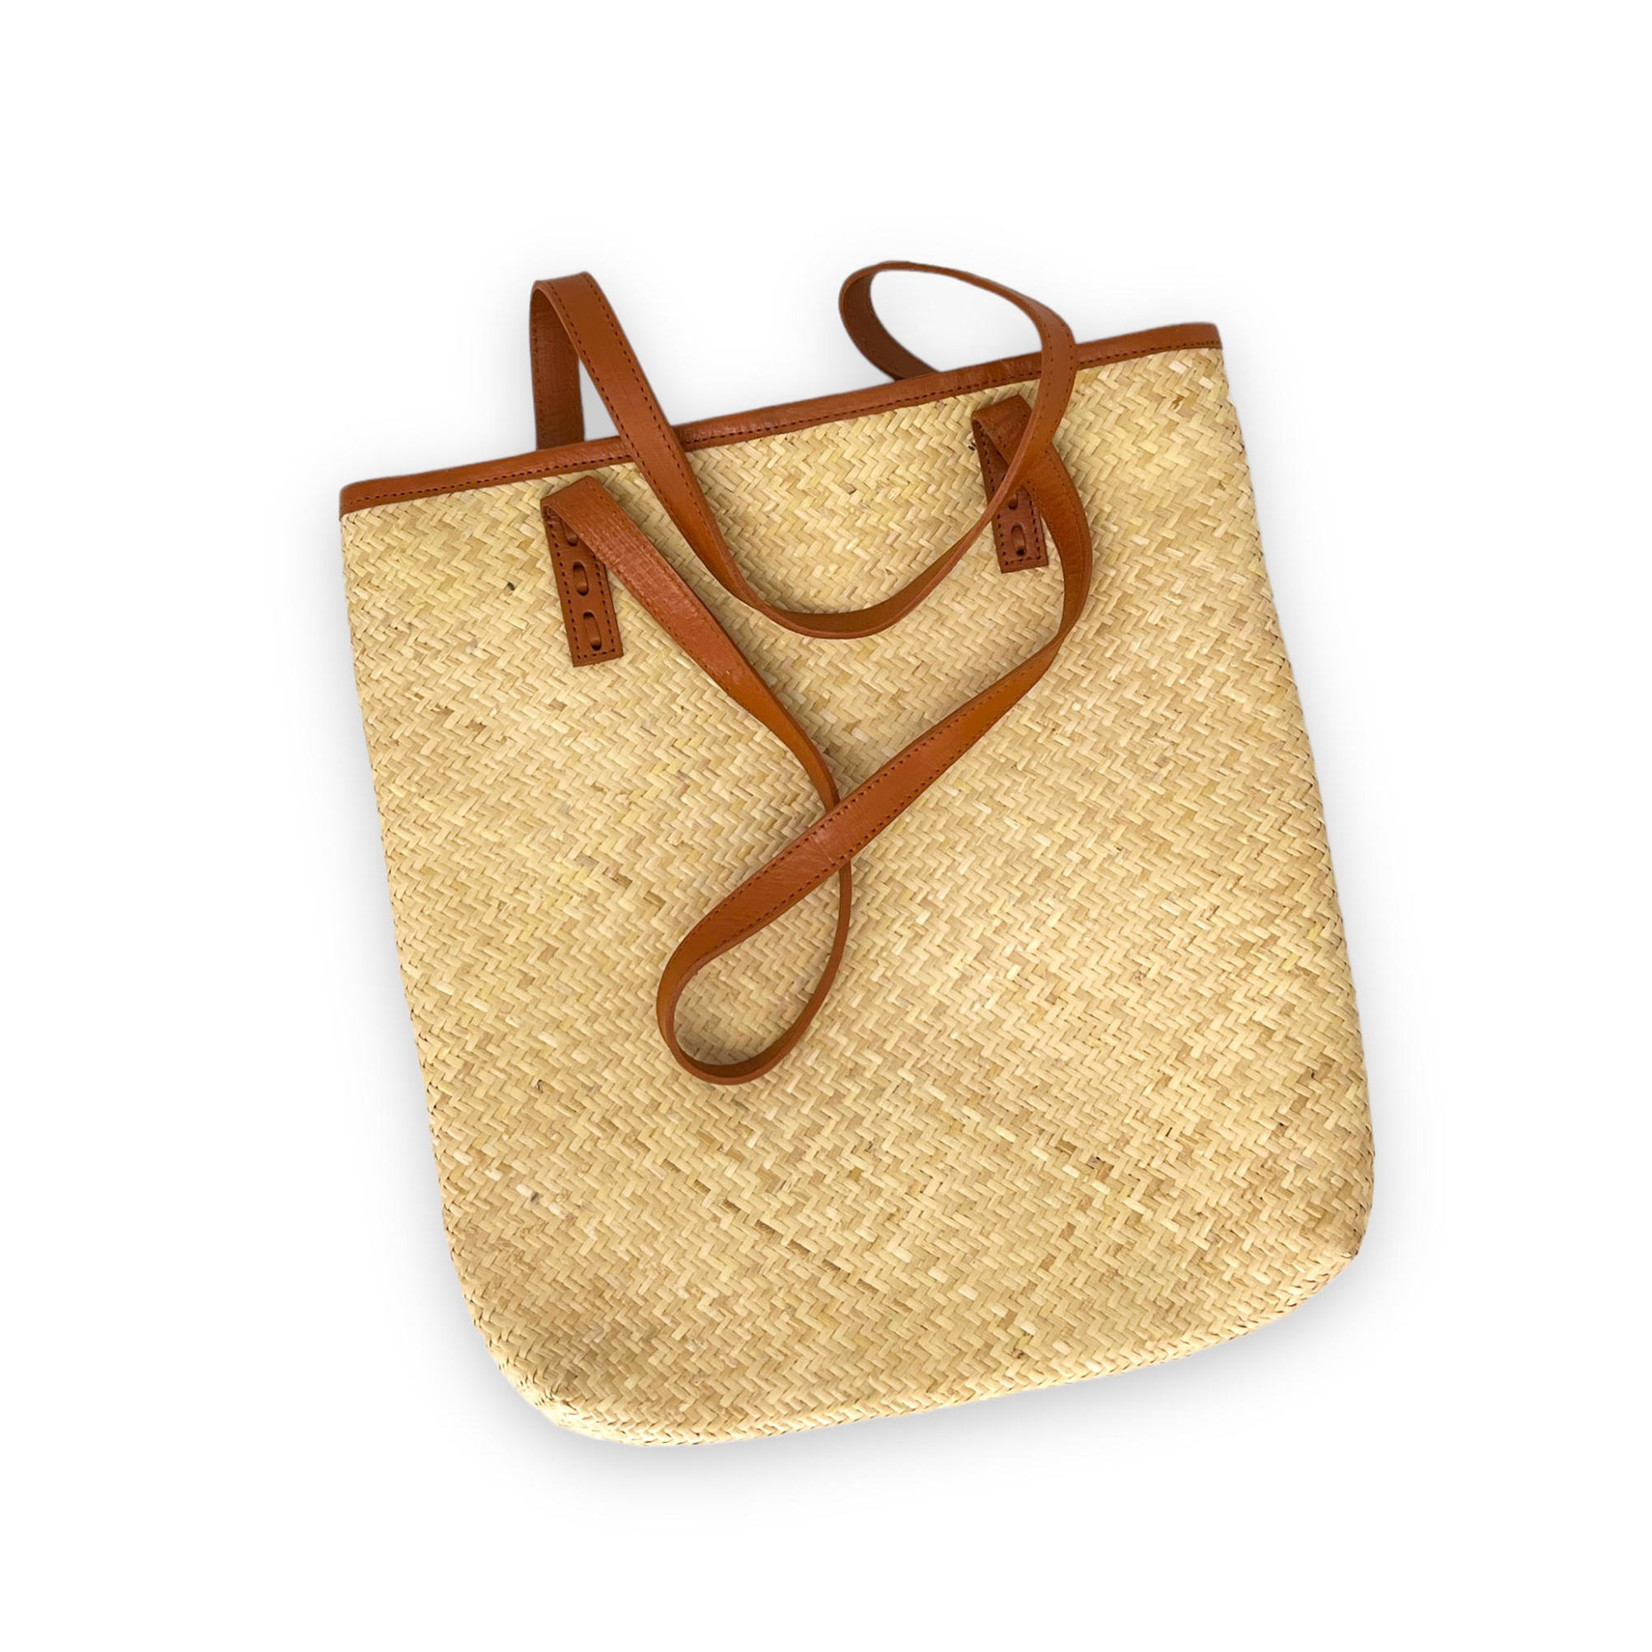 Hand Woven Ata Tote Bag with Brown Leather Handles